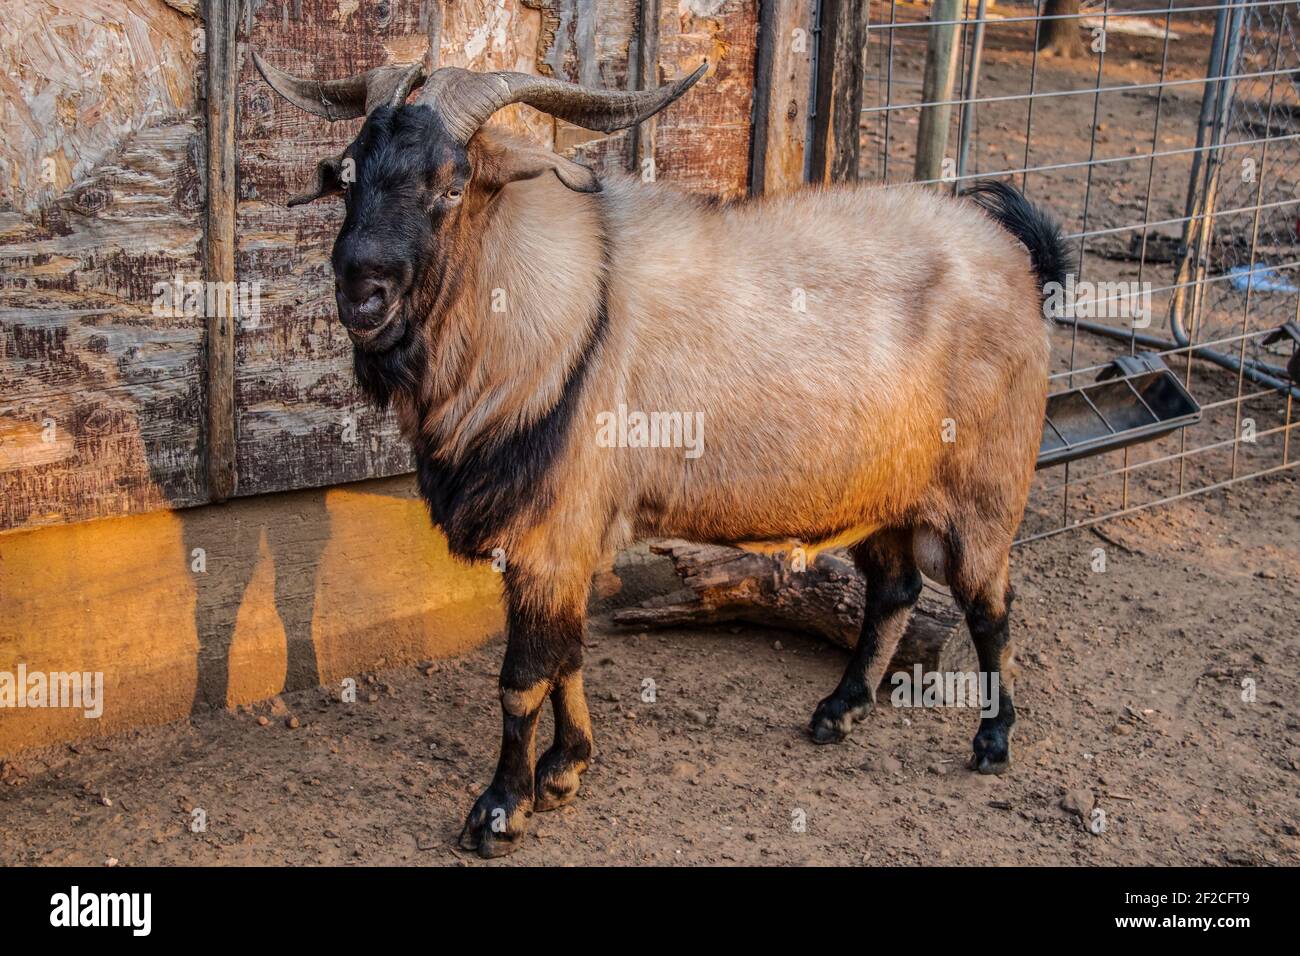 Ram goat with impressive horns standing against a textured grungy shed and fence with golden afternoon sun shining on him Stock Photo